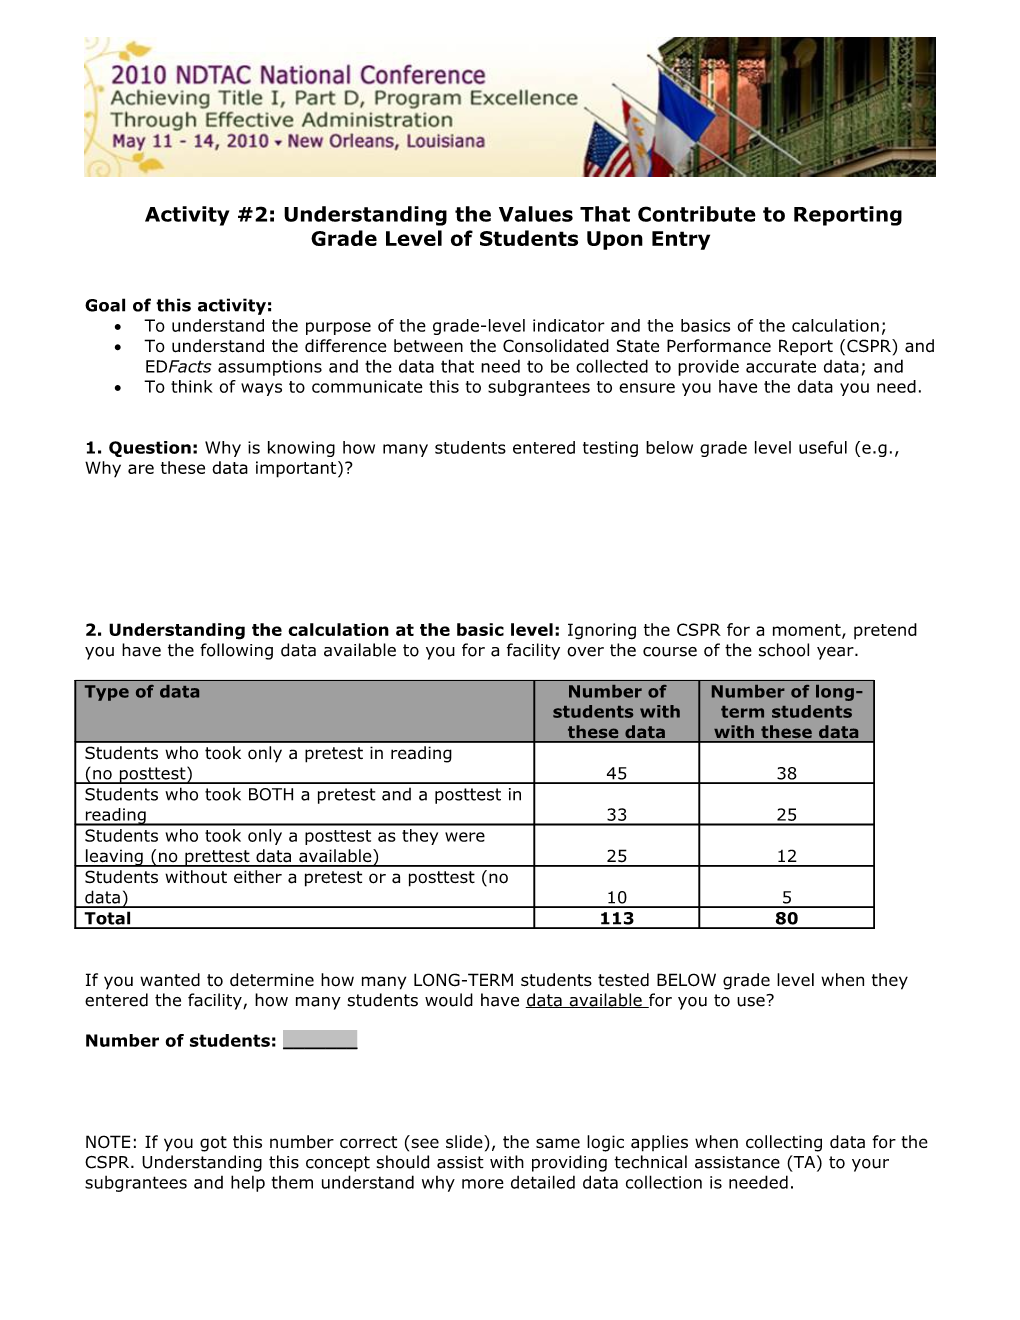 Activity #2: Understanding the Values That Contribute to Reporting Grade Level of Students